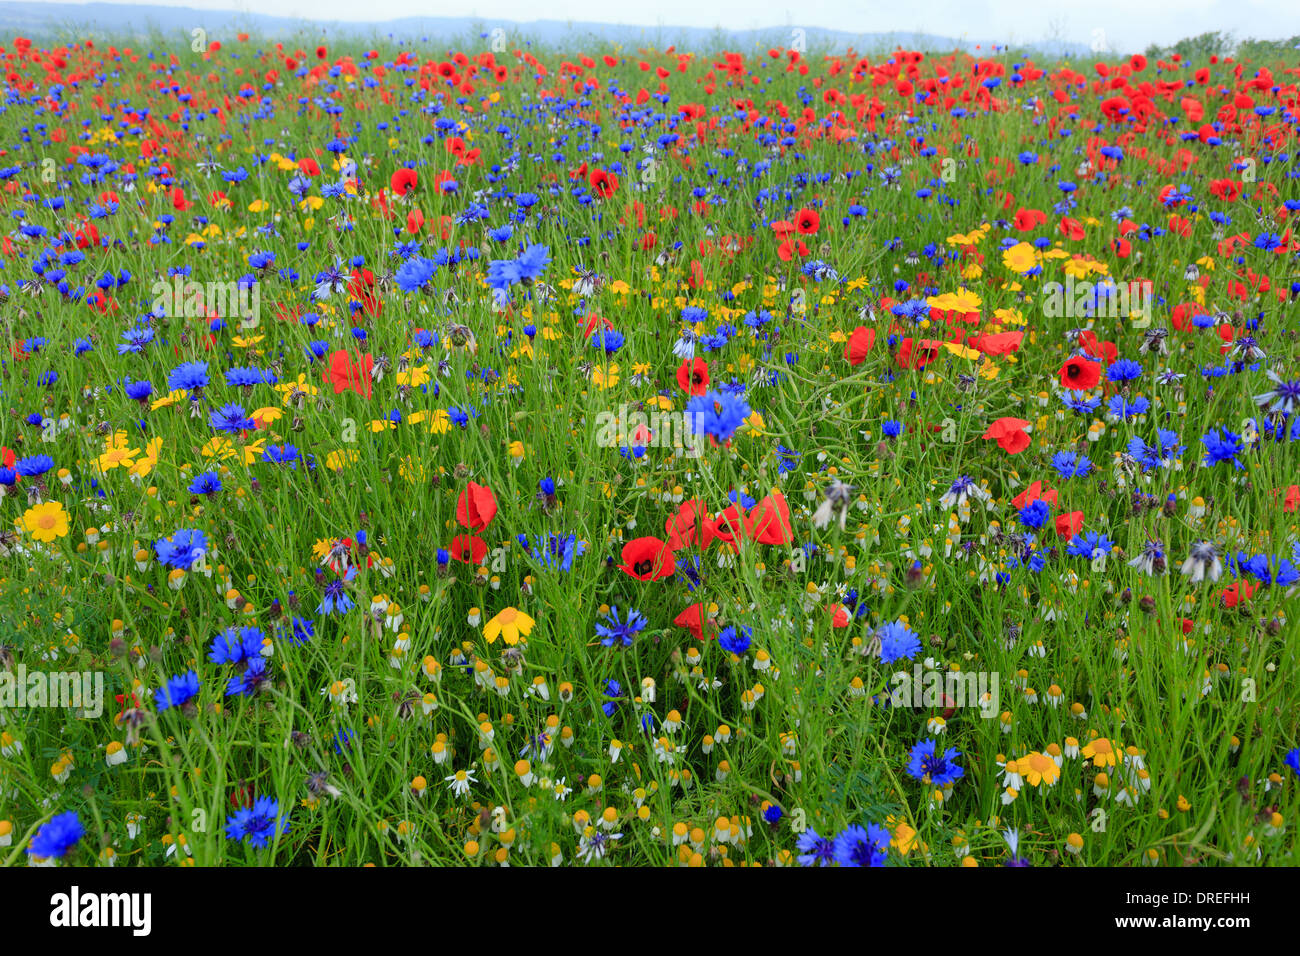 Rapeseed field invaded by arable weeds, cornflower, poppies, chamomile (white) and Corn Marigold (yellow), France, Calvados Stock Photo